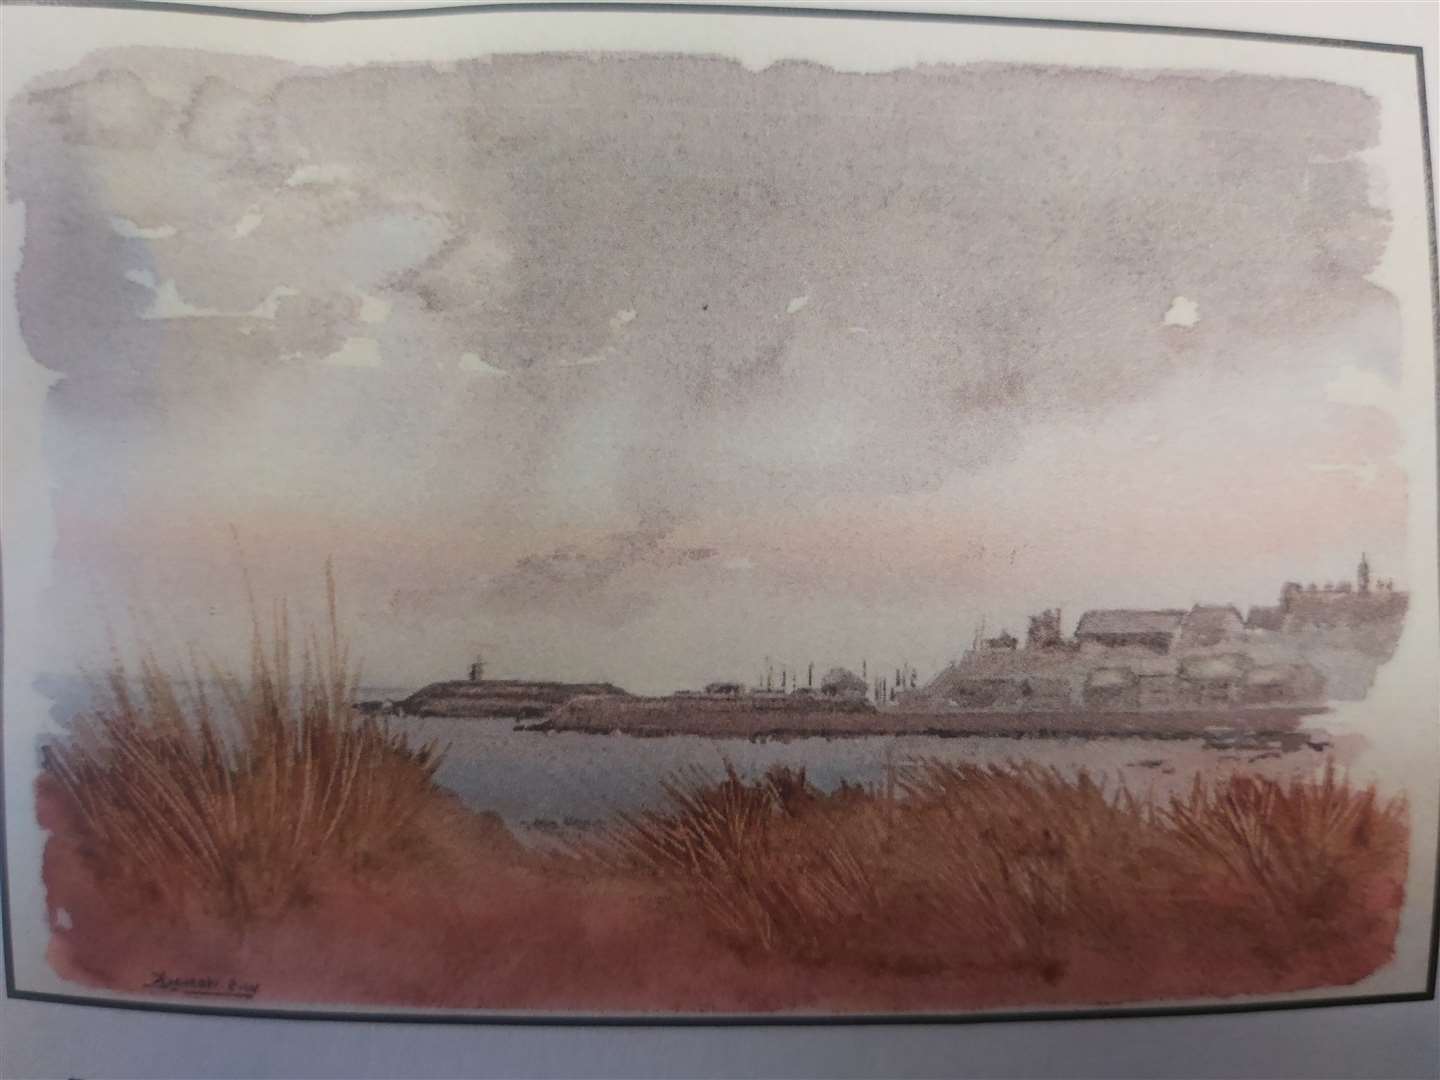 One of Dr Bill Hossack's watercolours which will be on sale this weekend.